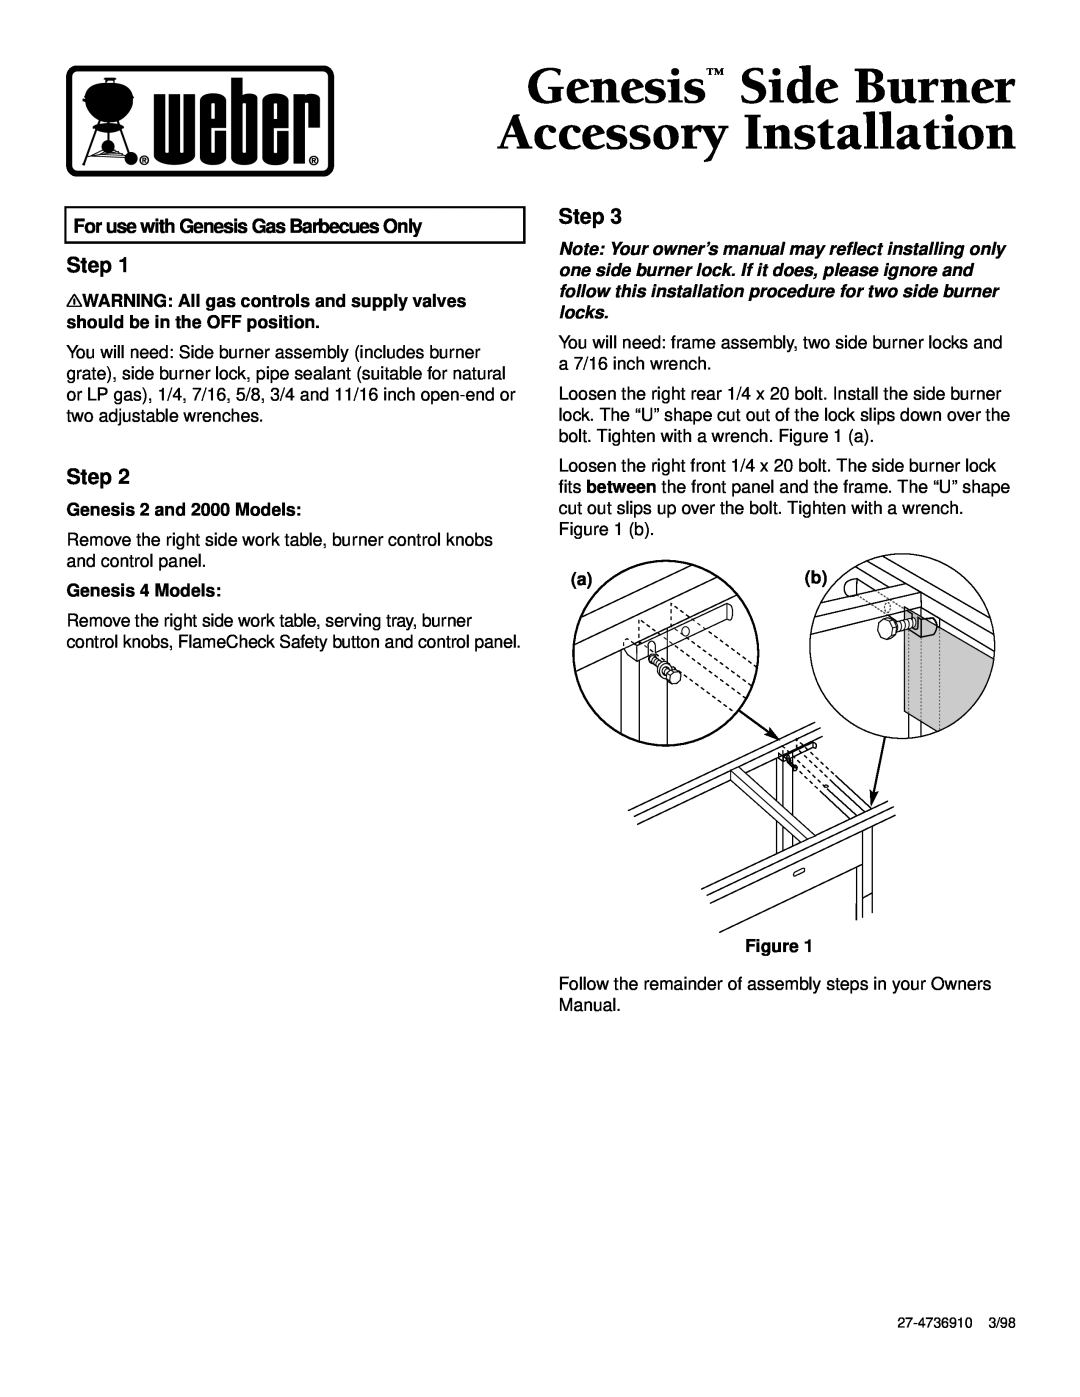 Weber 2 owner manual Step, For use with Genesis Gas Barbecues Only, Genesis Side Burner Accessory Installation 